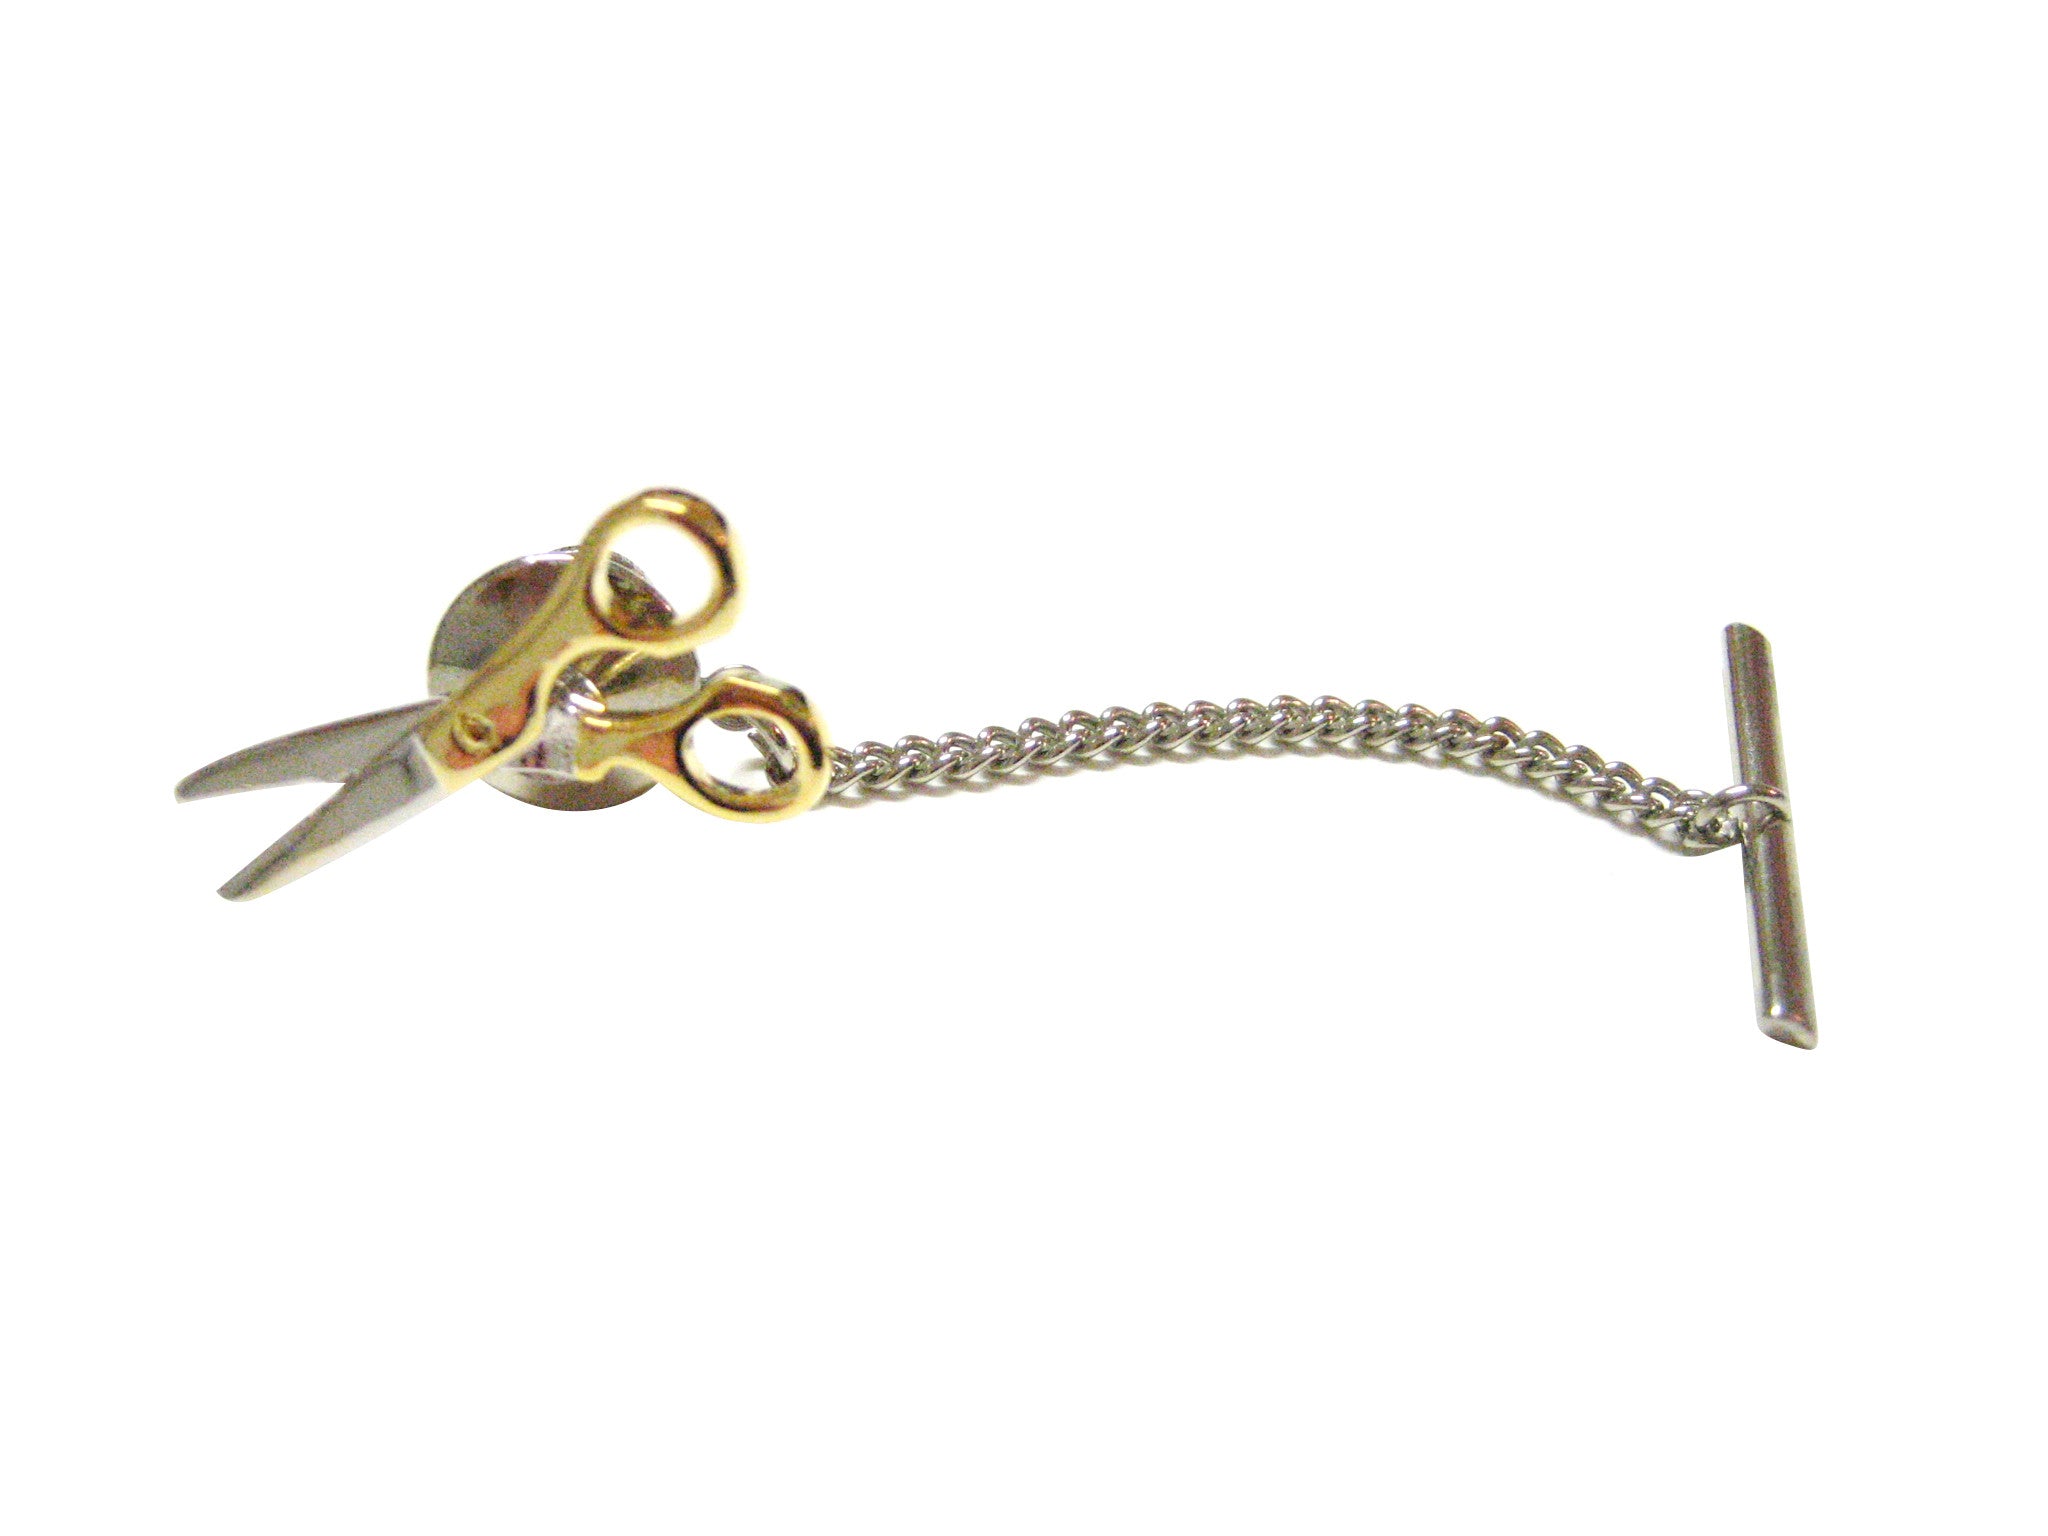 Gold and Silver Toned Scissor Tie Tack